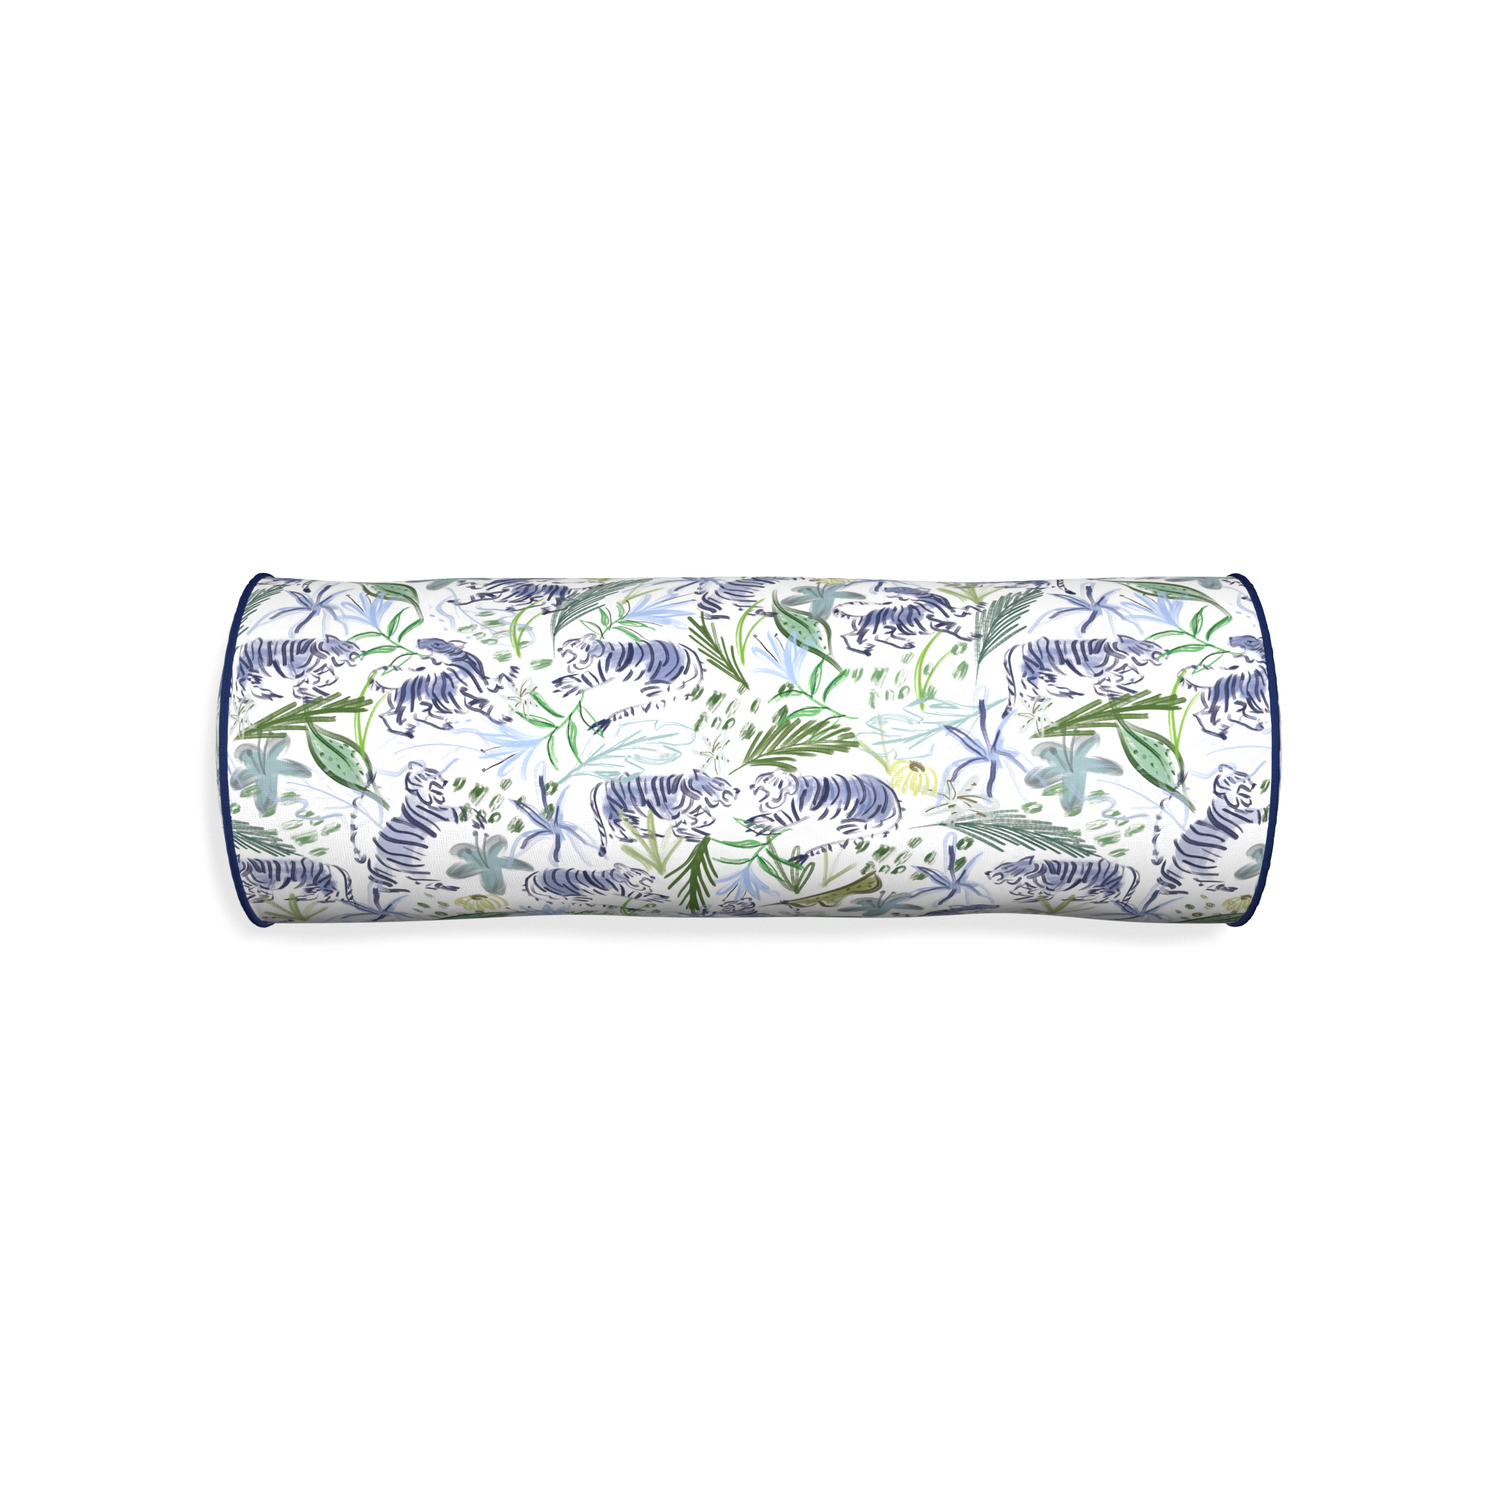 Bolster frida green custom green tigerpillow with midnight piping on white background